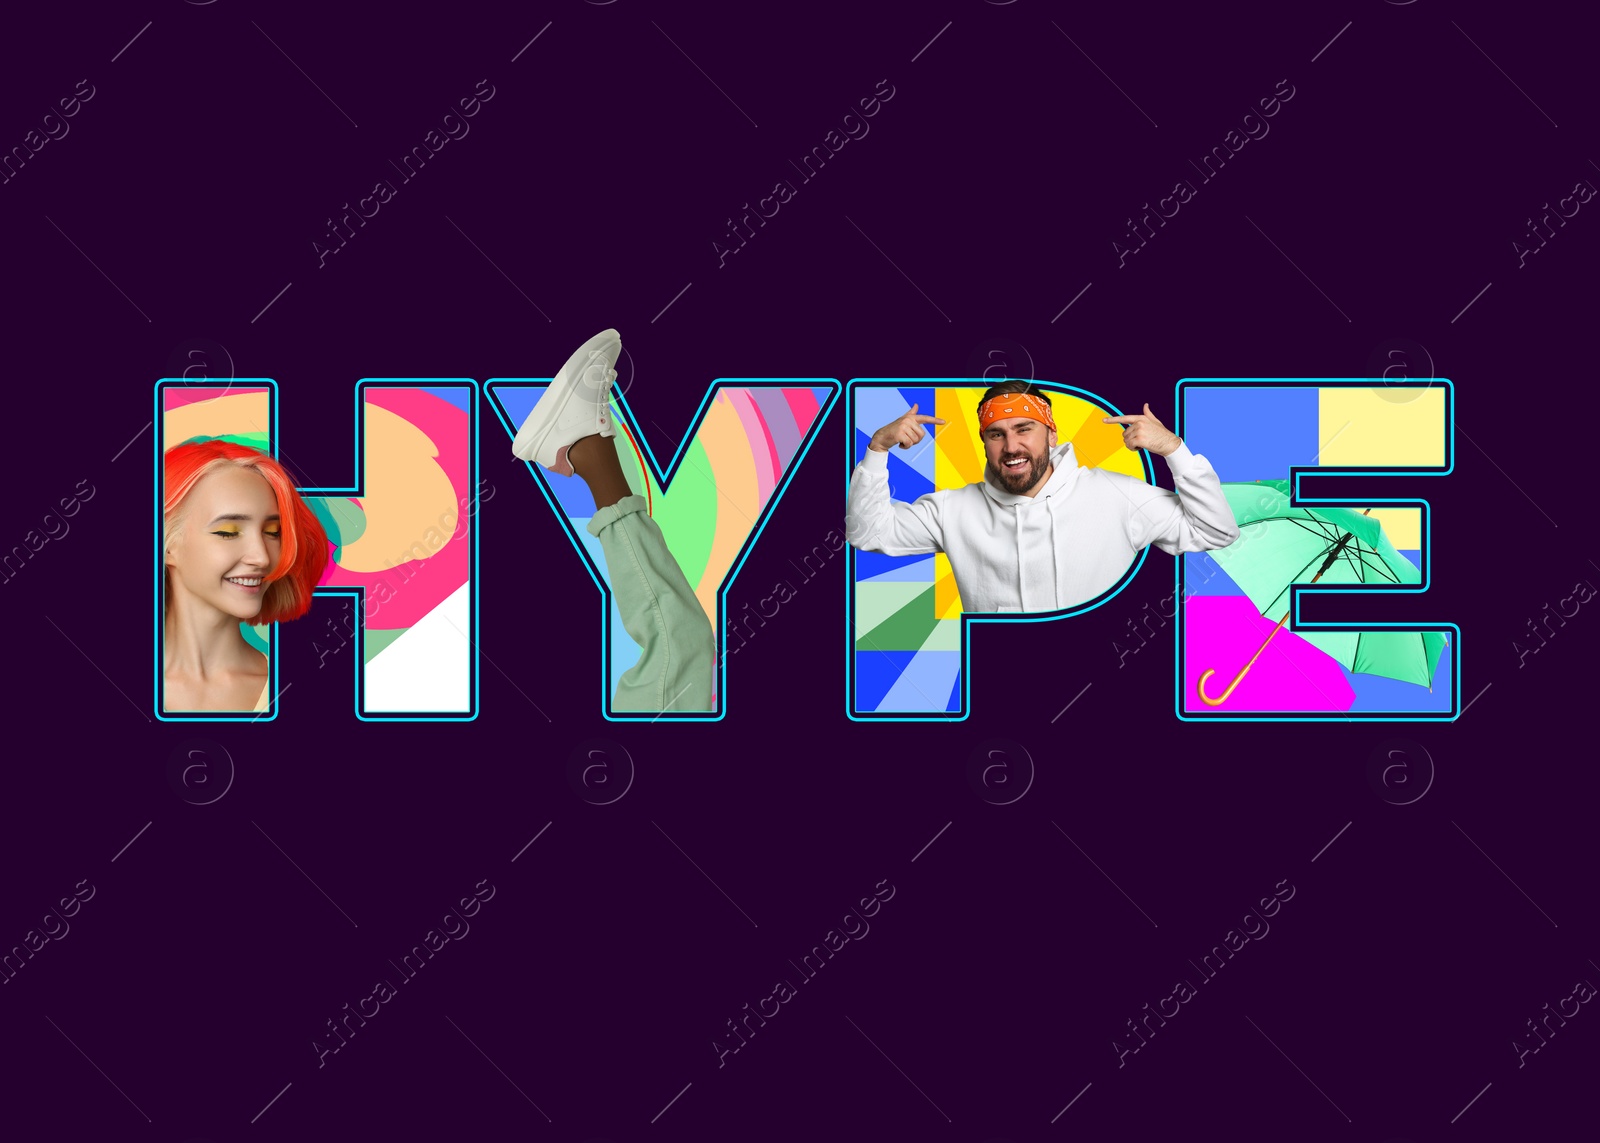 Image of Word Hype with photos of stylish people and green umbrella inside. Creative artwork on dark purple background